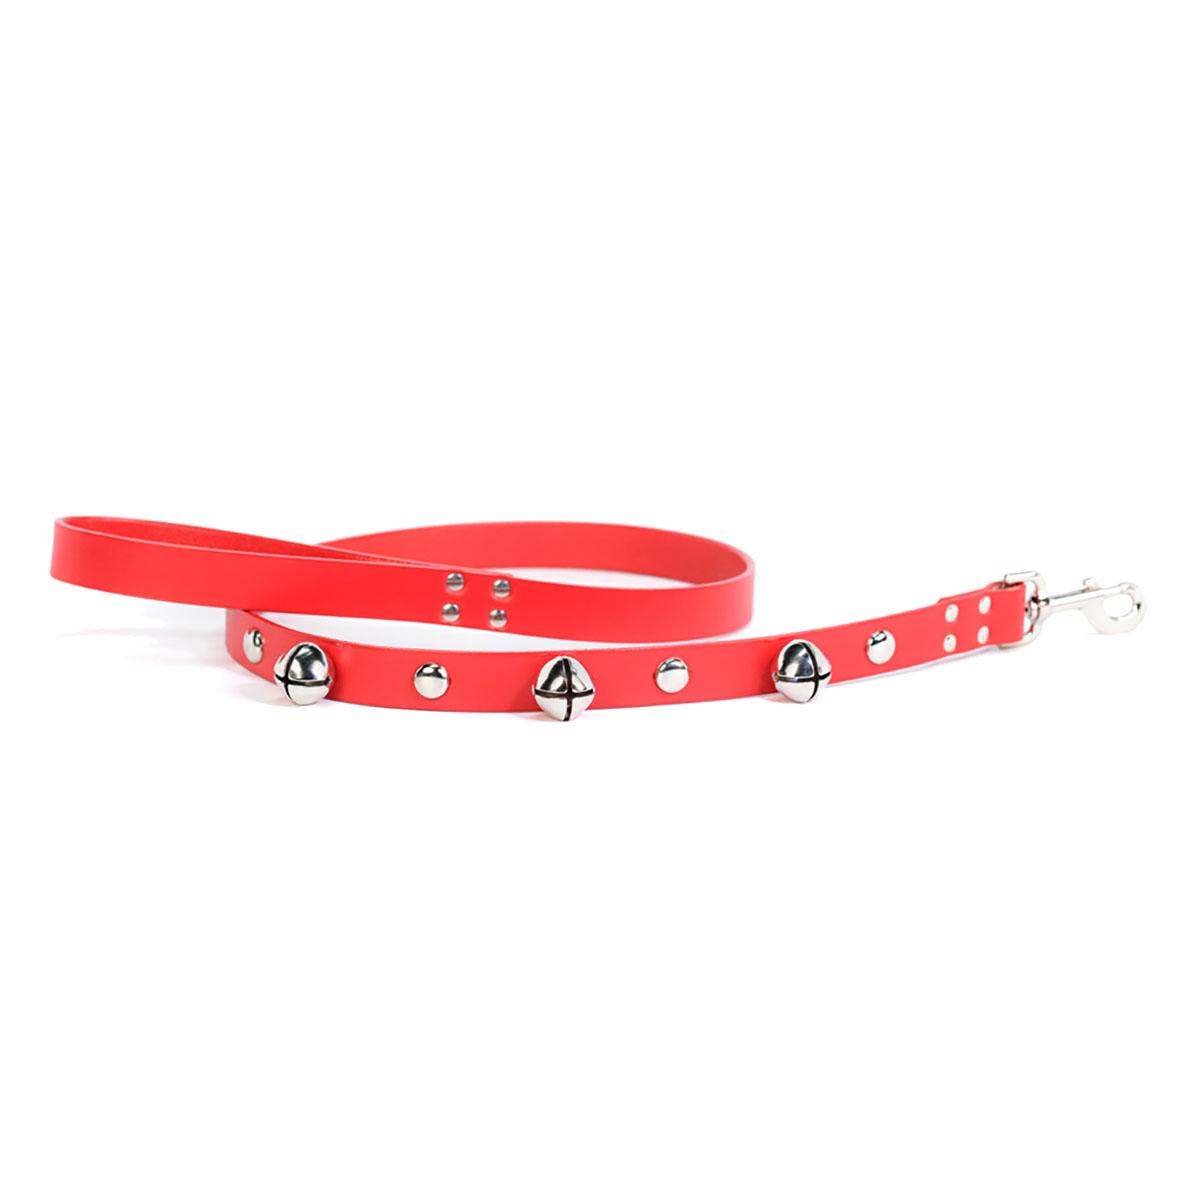 Auburn Leathercrafters Jingle Bell Studded Leather Dog Leash - Red